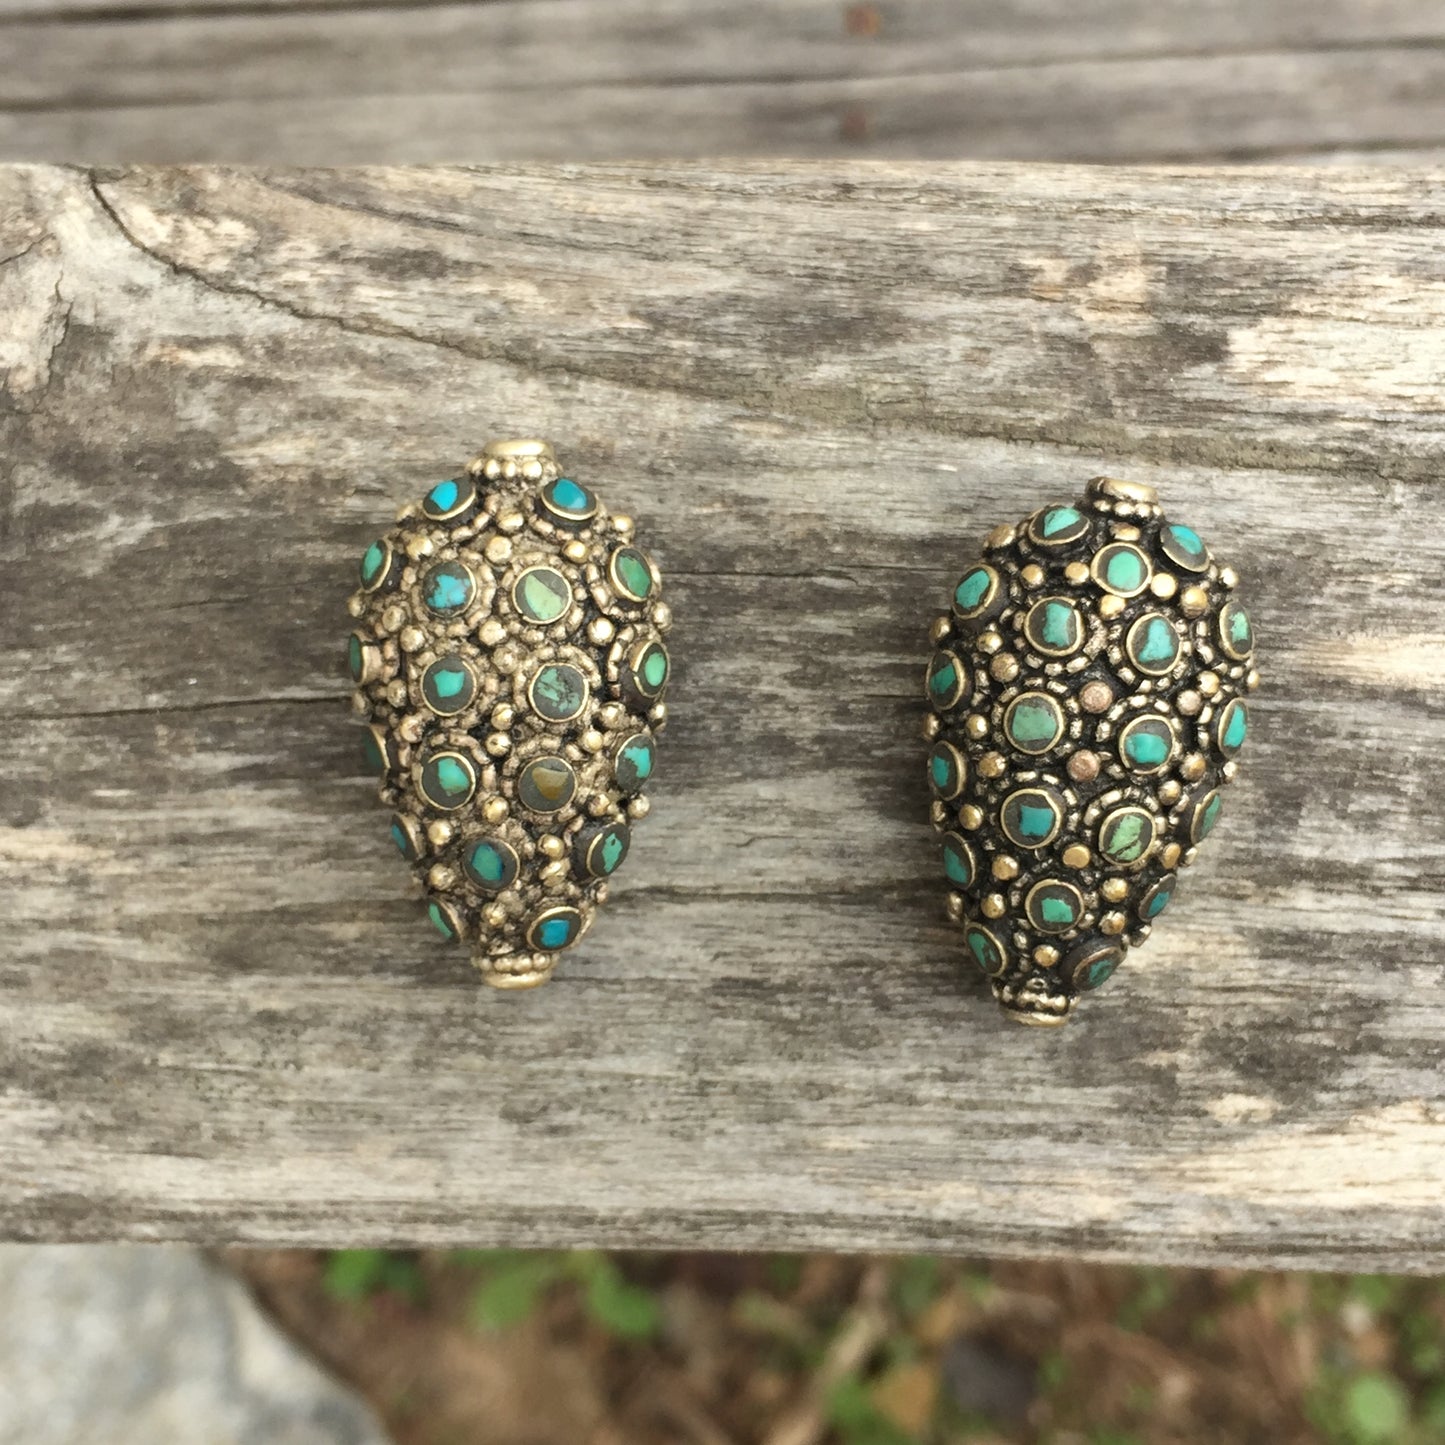 Two Turquoise Inlay Beads